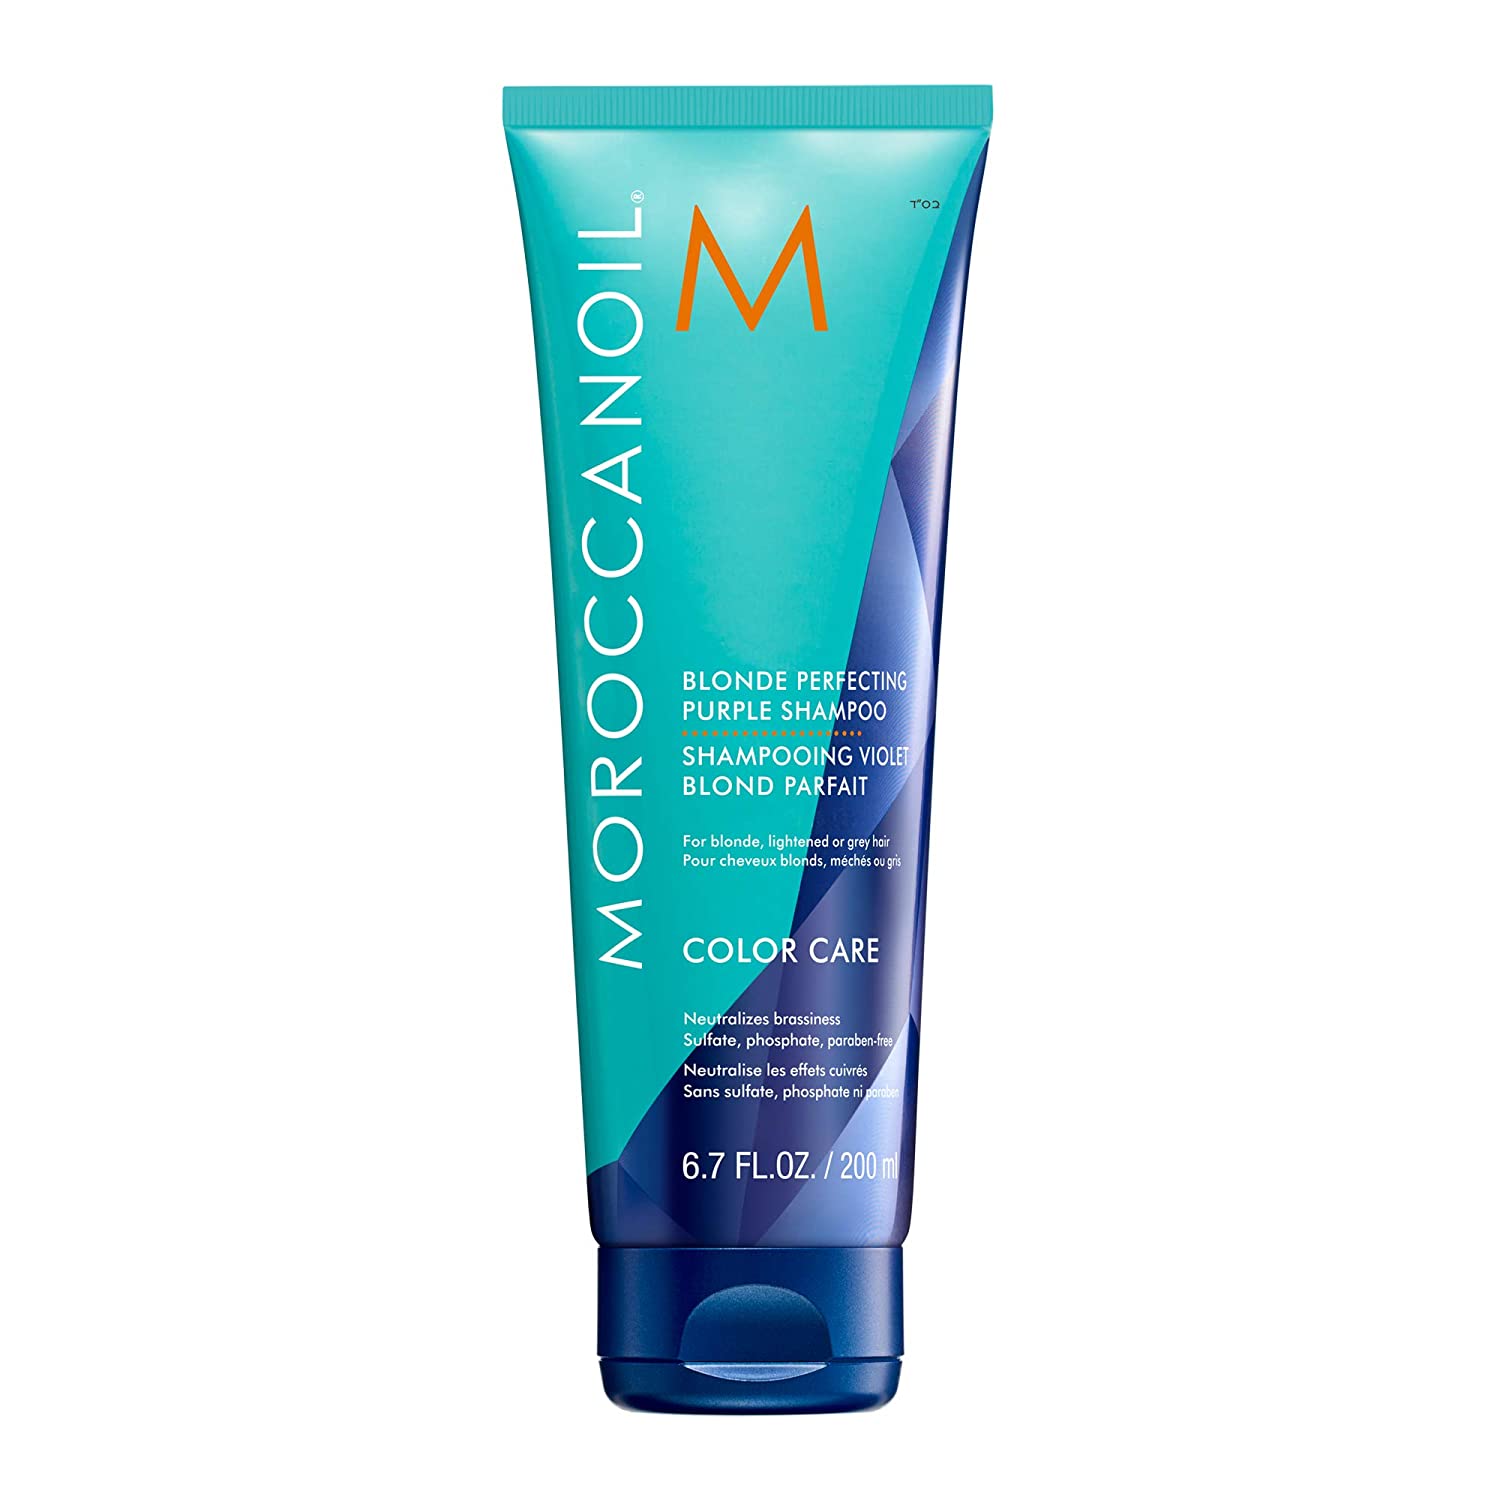 A bottle of Moroccanoil Blonde Perfecting Purple Shampoo.